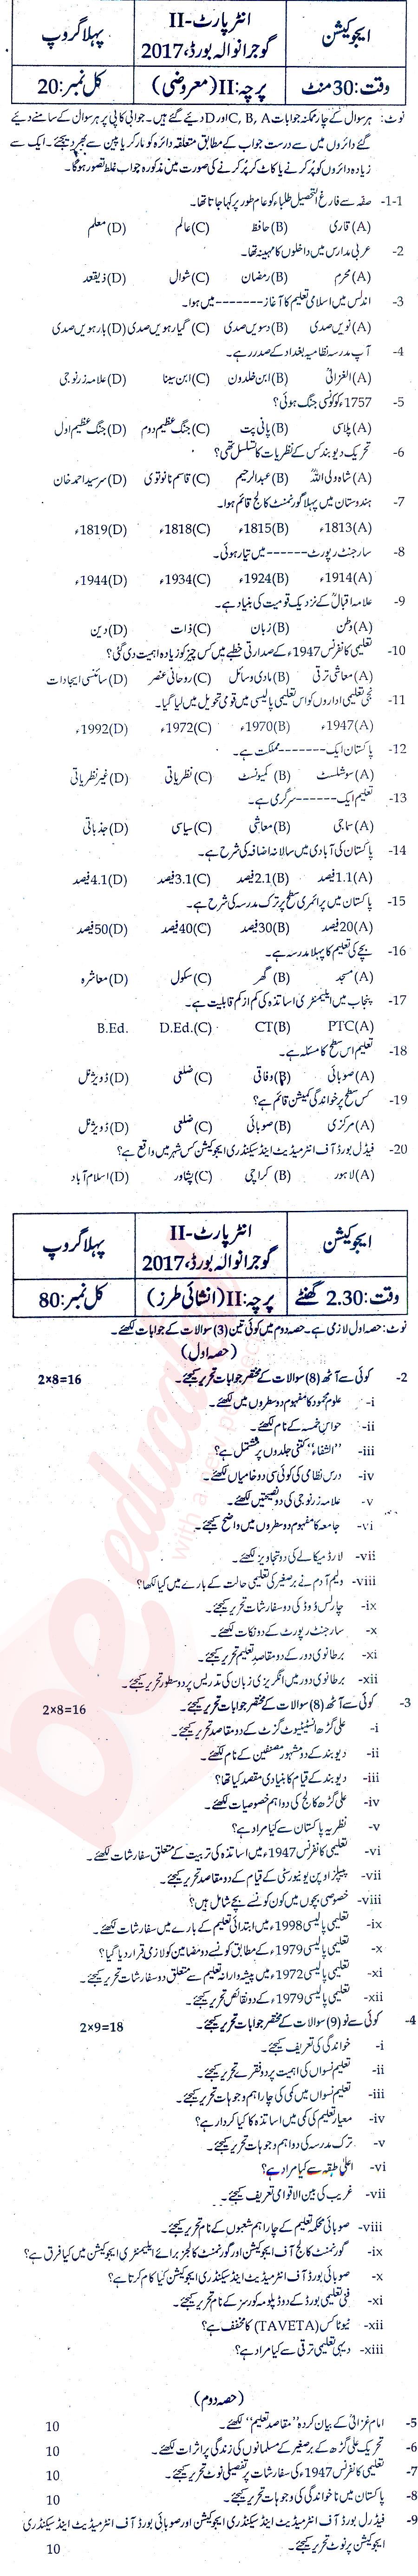 Education FA Part 2 Past Paper Group 1 BISE Gujranwala 2017